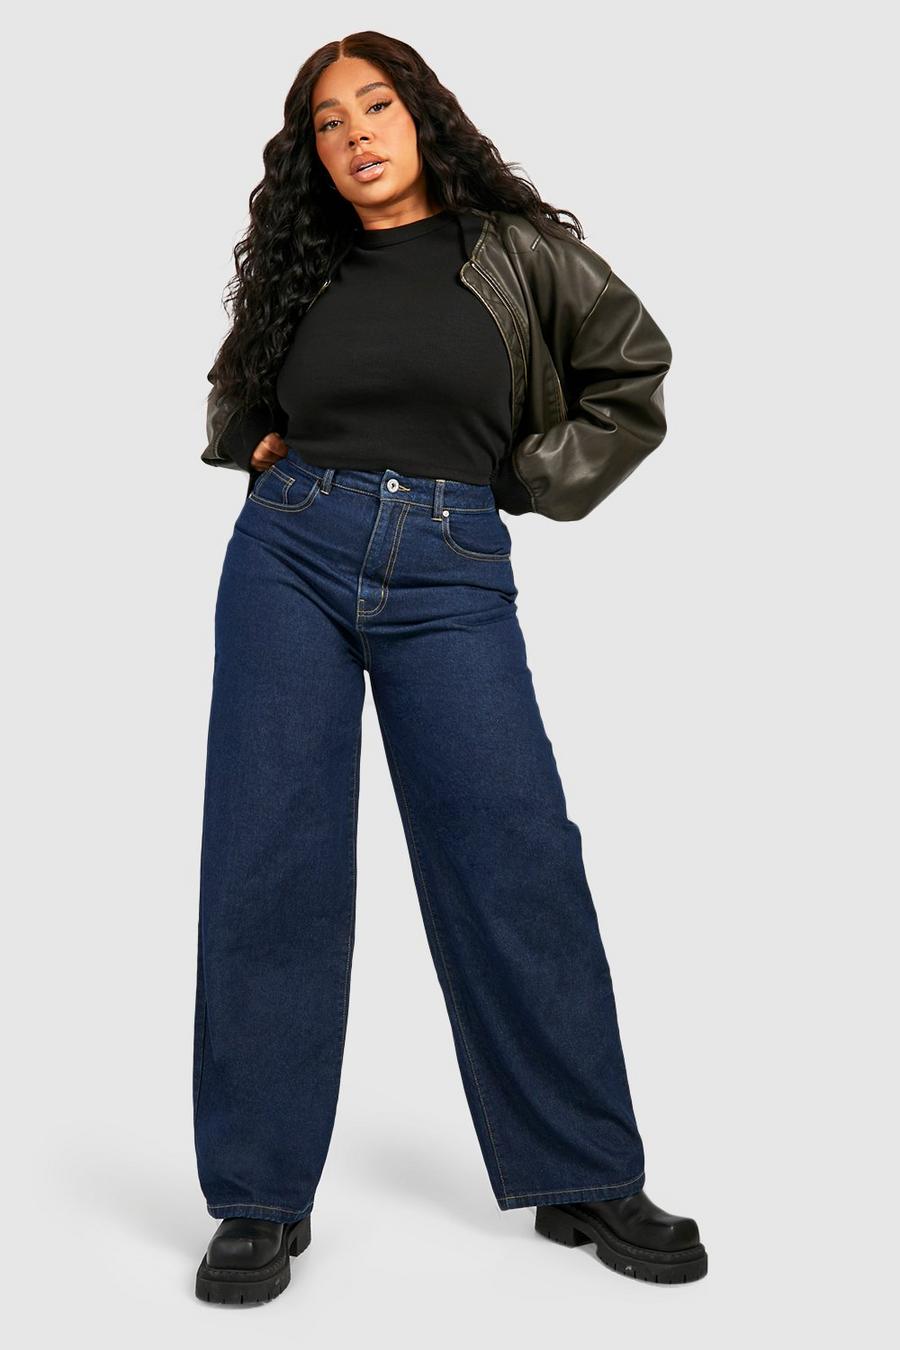 Grande taille - Jean large taille haute, Dark blue image number 1